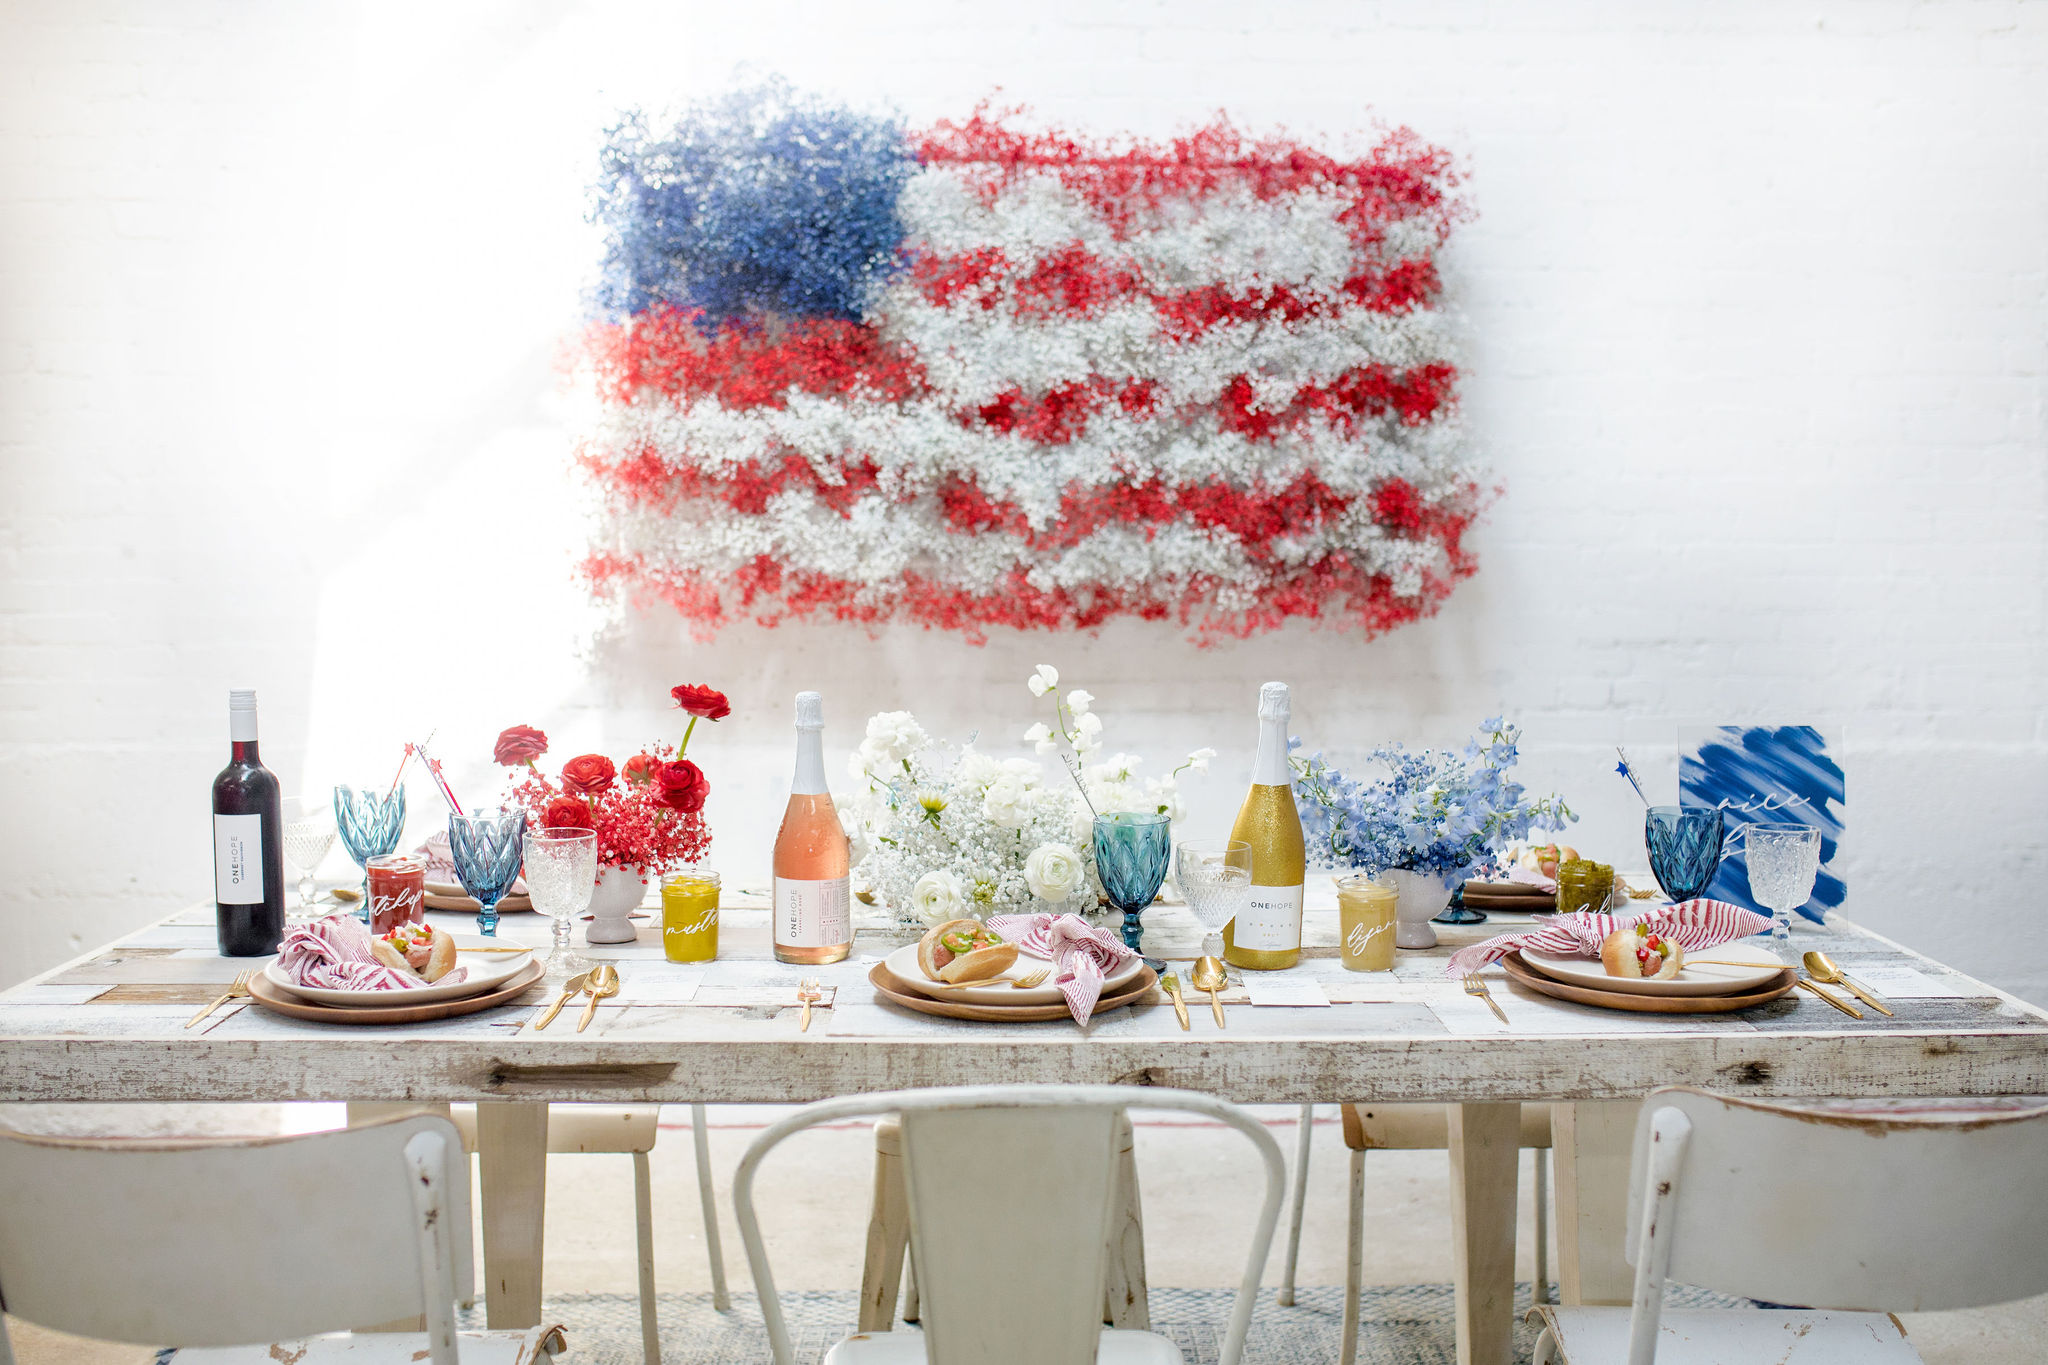 Red White & Barbecue – 4th of July Celebration!